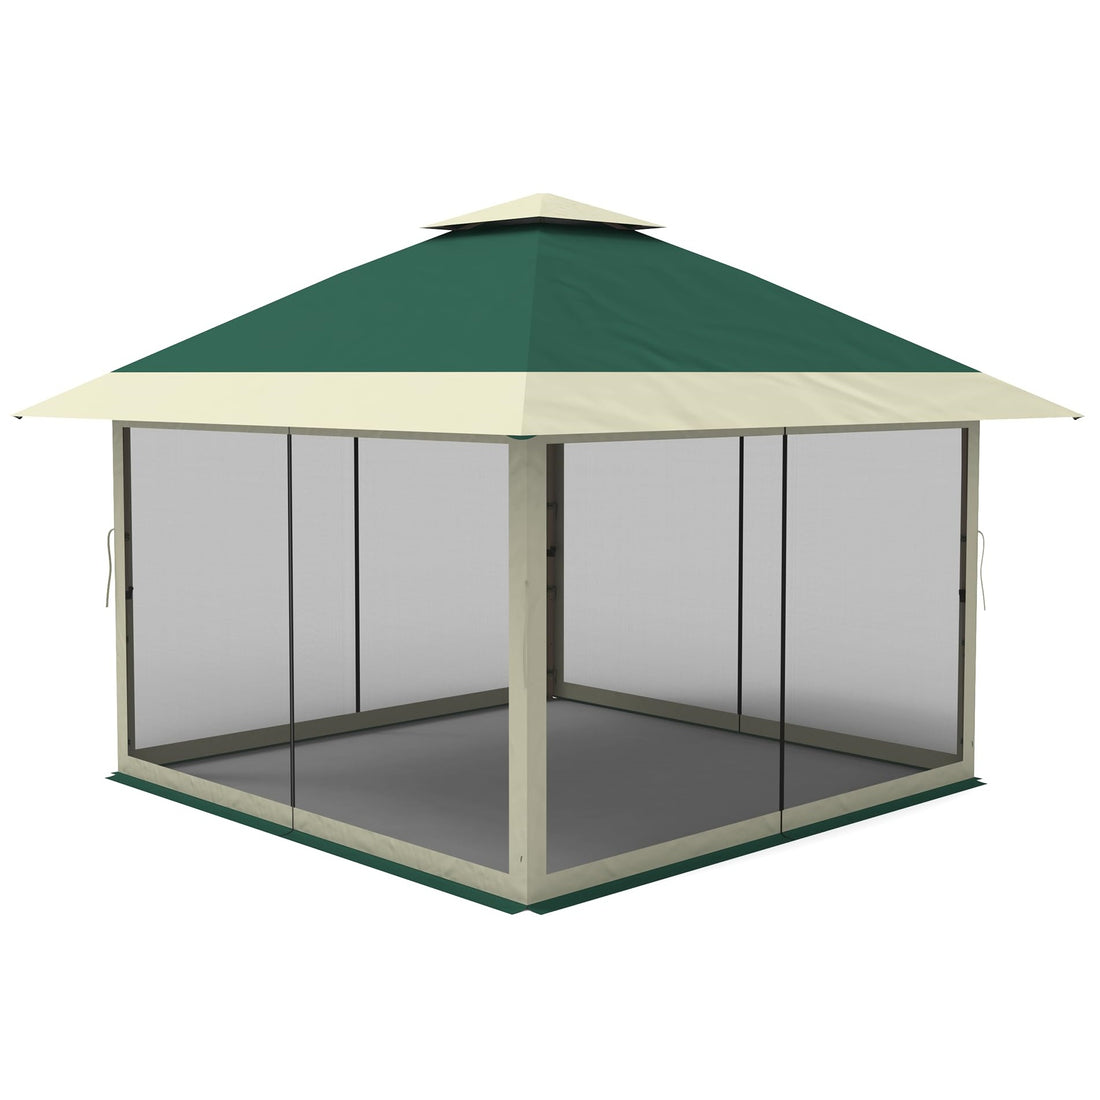 13x13FT Pop Up Gazebo Outdoor Canopy Shelter with Mosquito Netting 4 Stanbags Instant Gazebo Tent for Lawn, Garden, Backyard Deck (Olive Green+Taupe)